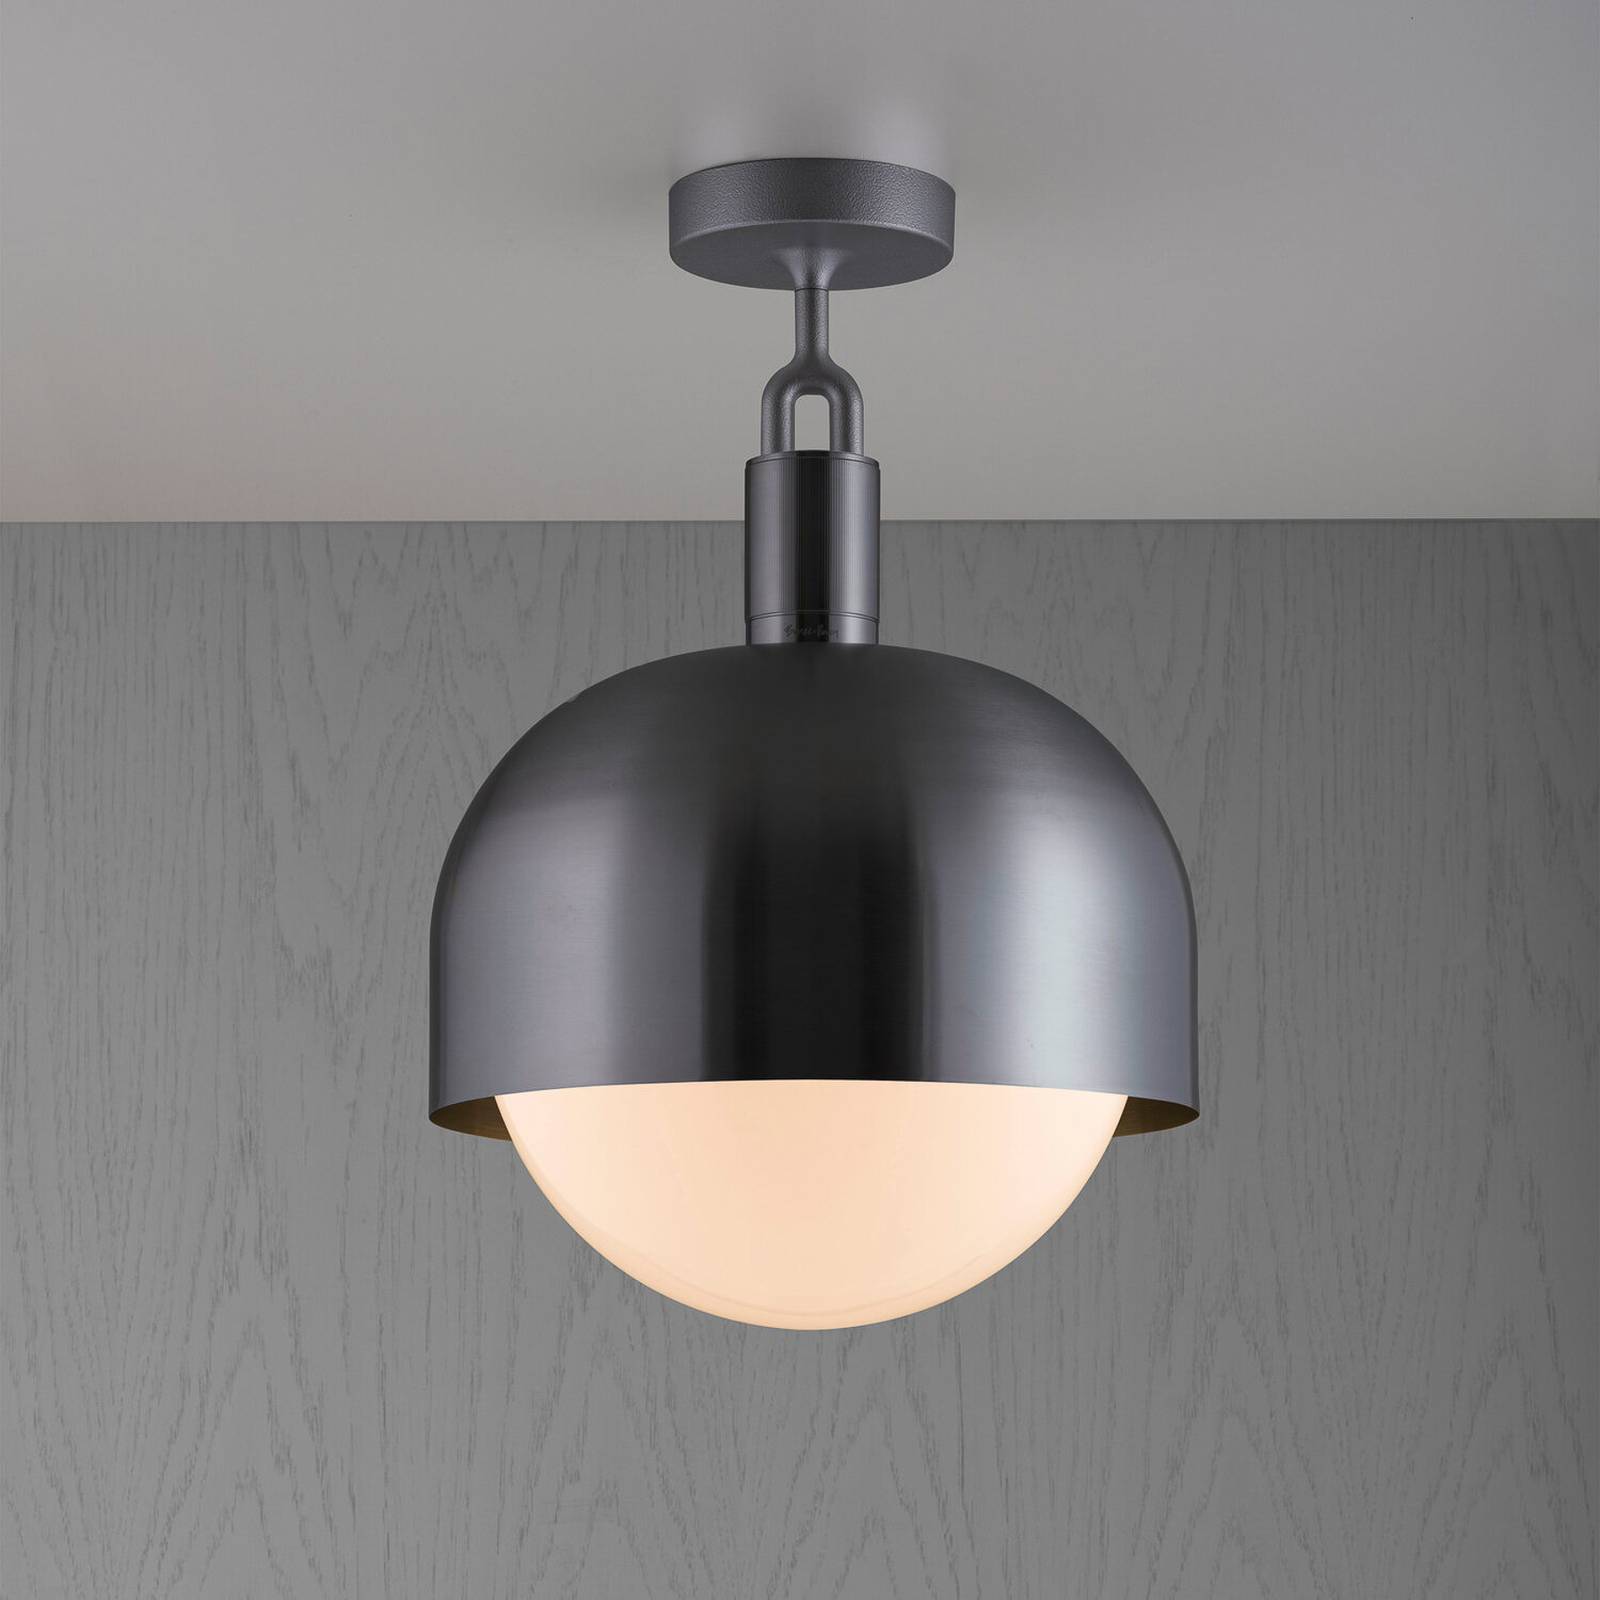 Image of Buster + Punch Forked plafond Gunmetal/opal Ø 34cm 